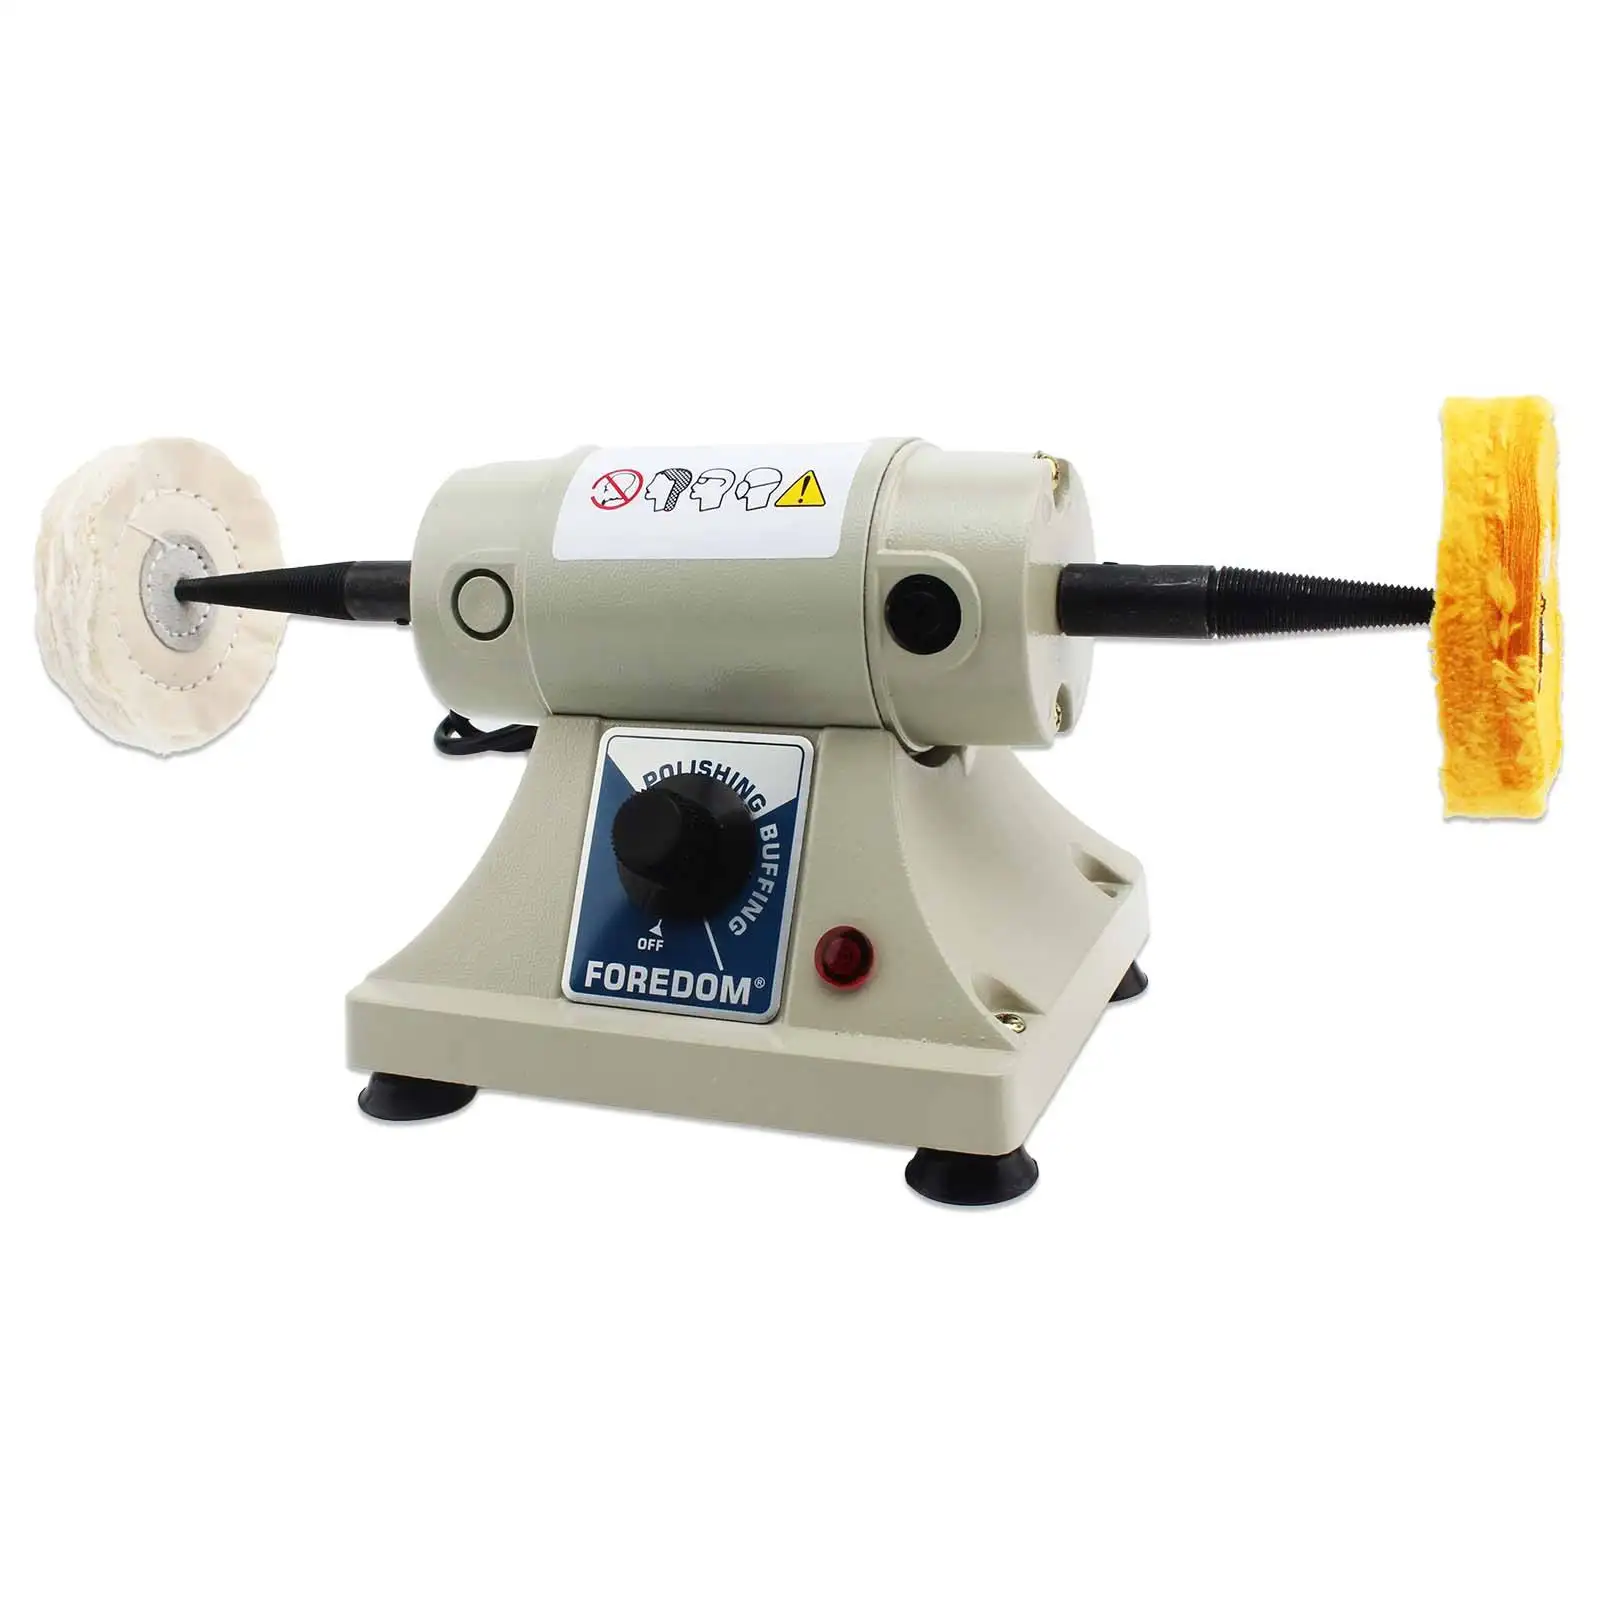 DEsktop Cloth Wheel Polishing Machine Adjustable Speed Double Head Electric Grinding And Rust Removal Tools Jewelry Polishing